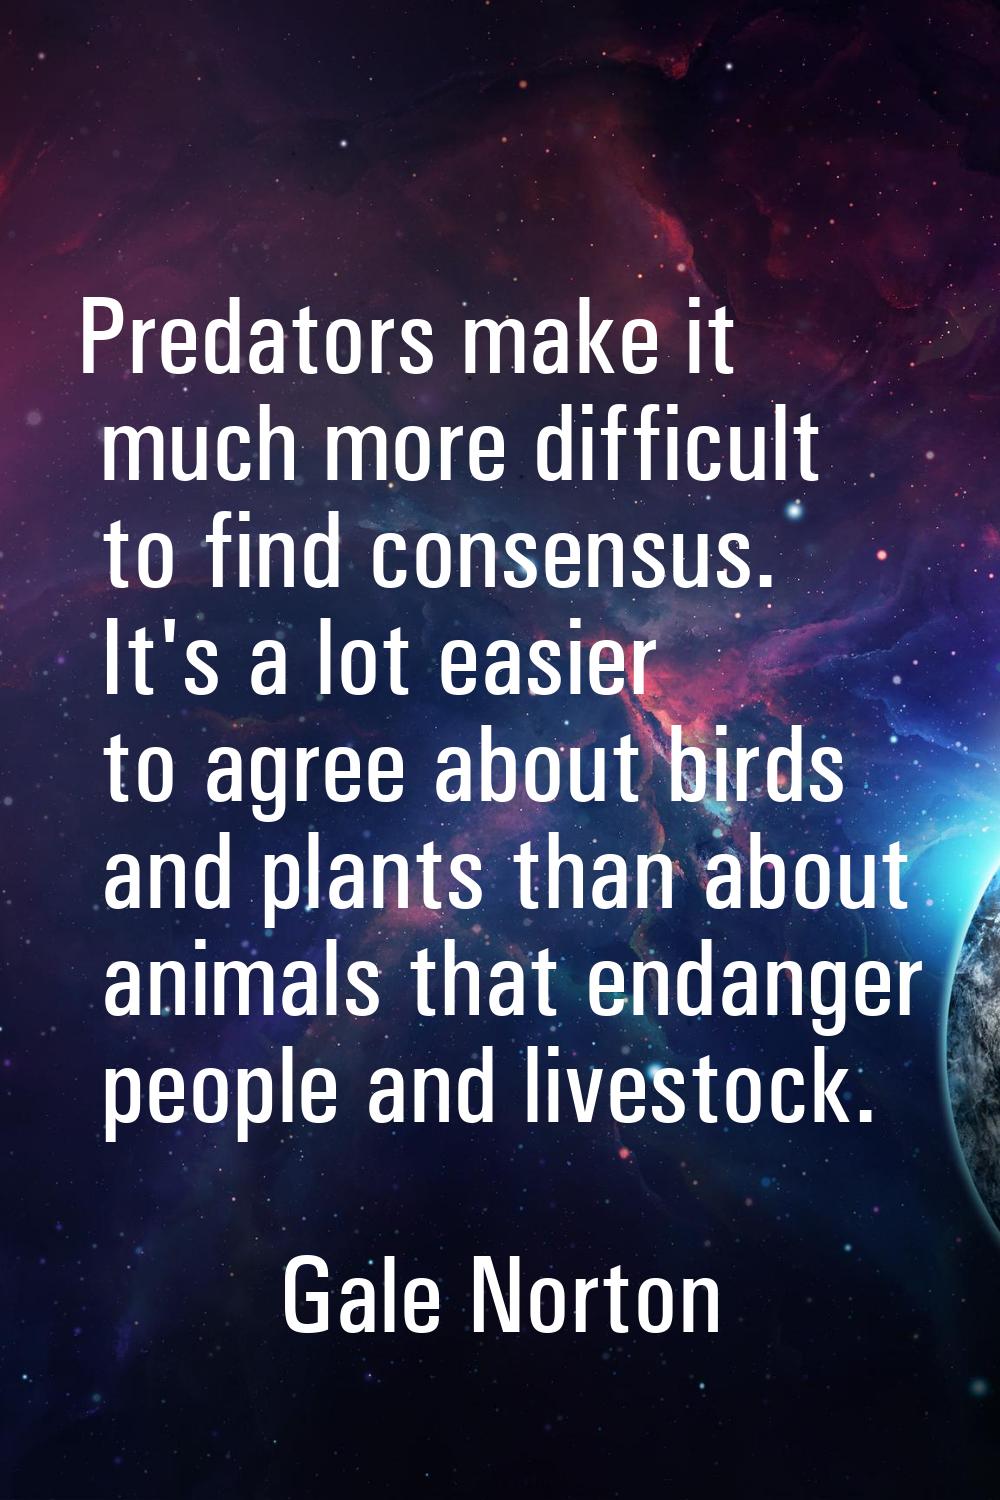 Predators make it much more difficult to find consensus. It's a lot easier to agree about birds and